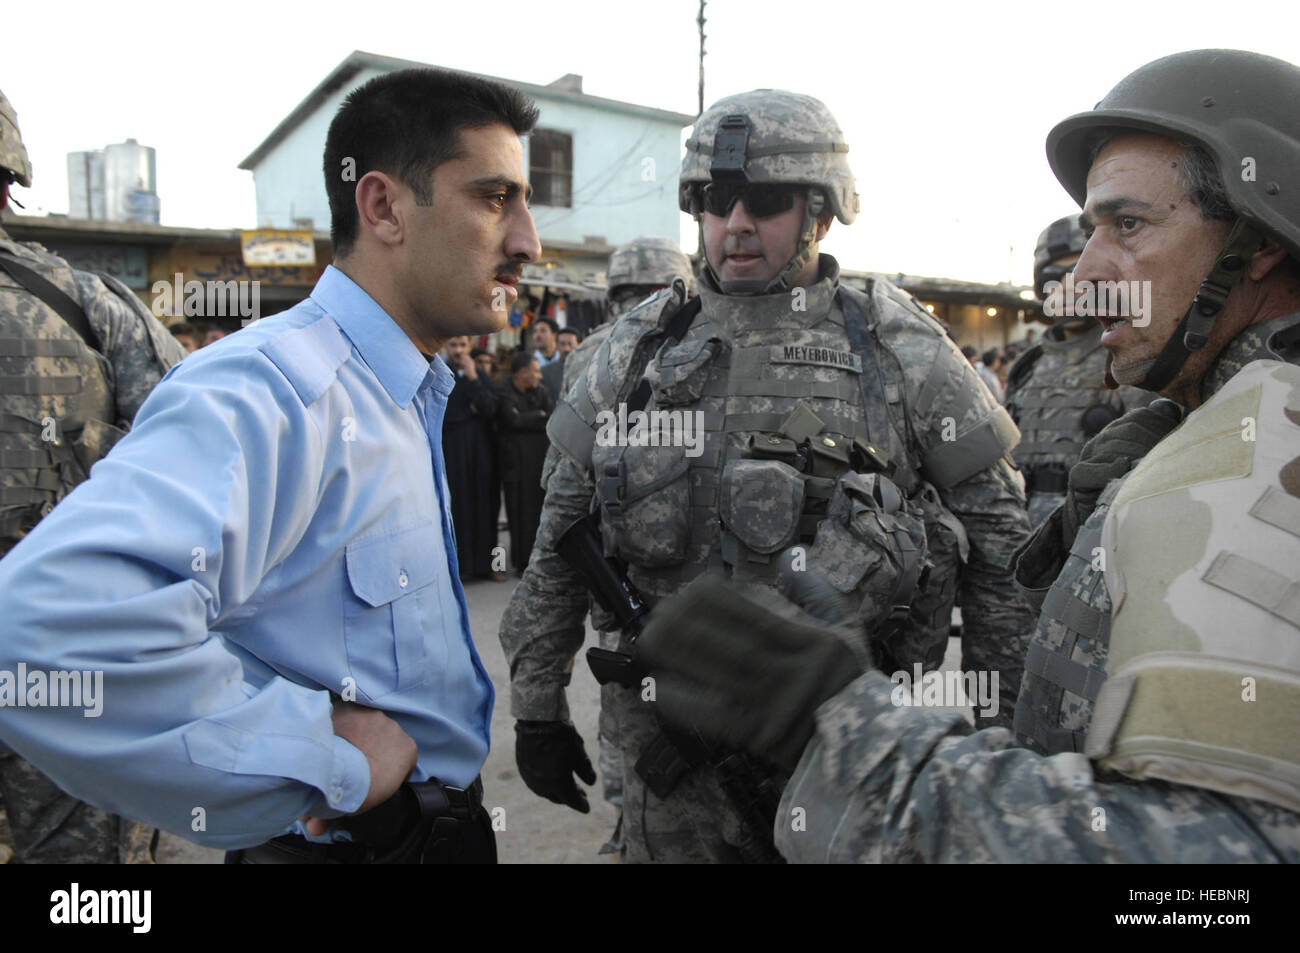 U.S. Army Lt. Col. Drew Meyerowich (center), battalion commander, 2nd Battalion, 27th Infantry Regiment, 3rd Brigade Combat Team, 25th Infantry Division, discusses security issues with the Iraqi police through an interpreter 'Cowboy' (right). U.S. Army Soldiers travel to Alzab on a humanitarian assistance re-supply of 5,000 gallons of diesel fuel, 5,000 gallons of kerosene and 525 canisters of propane due to the bridge spanning the Little Zab River being blown by an insurgent's improvised explosive device, Province of Kirkuk, Iraq, March 25. U.S. Soldiers are with Headquarters Company, 2nd Bat Stock Photo